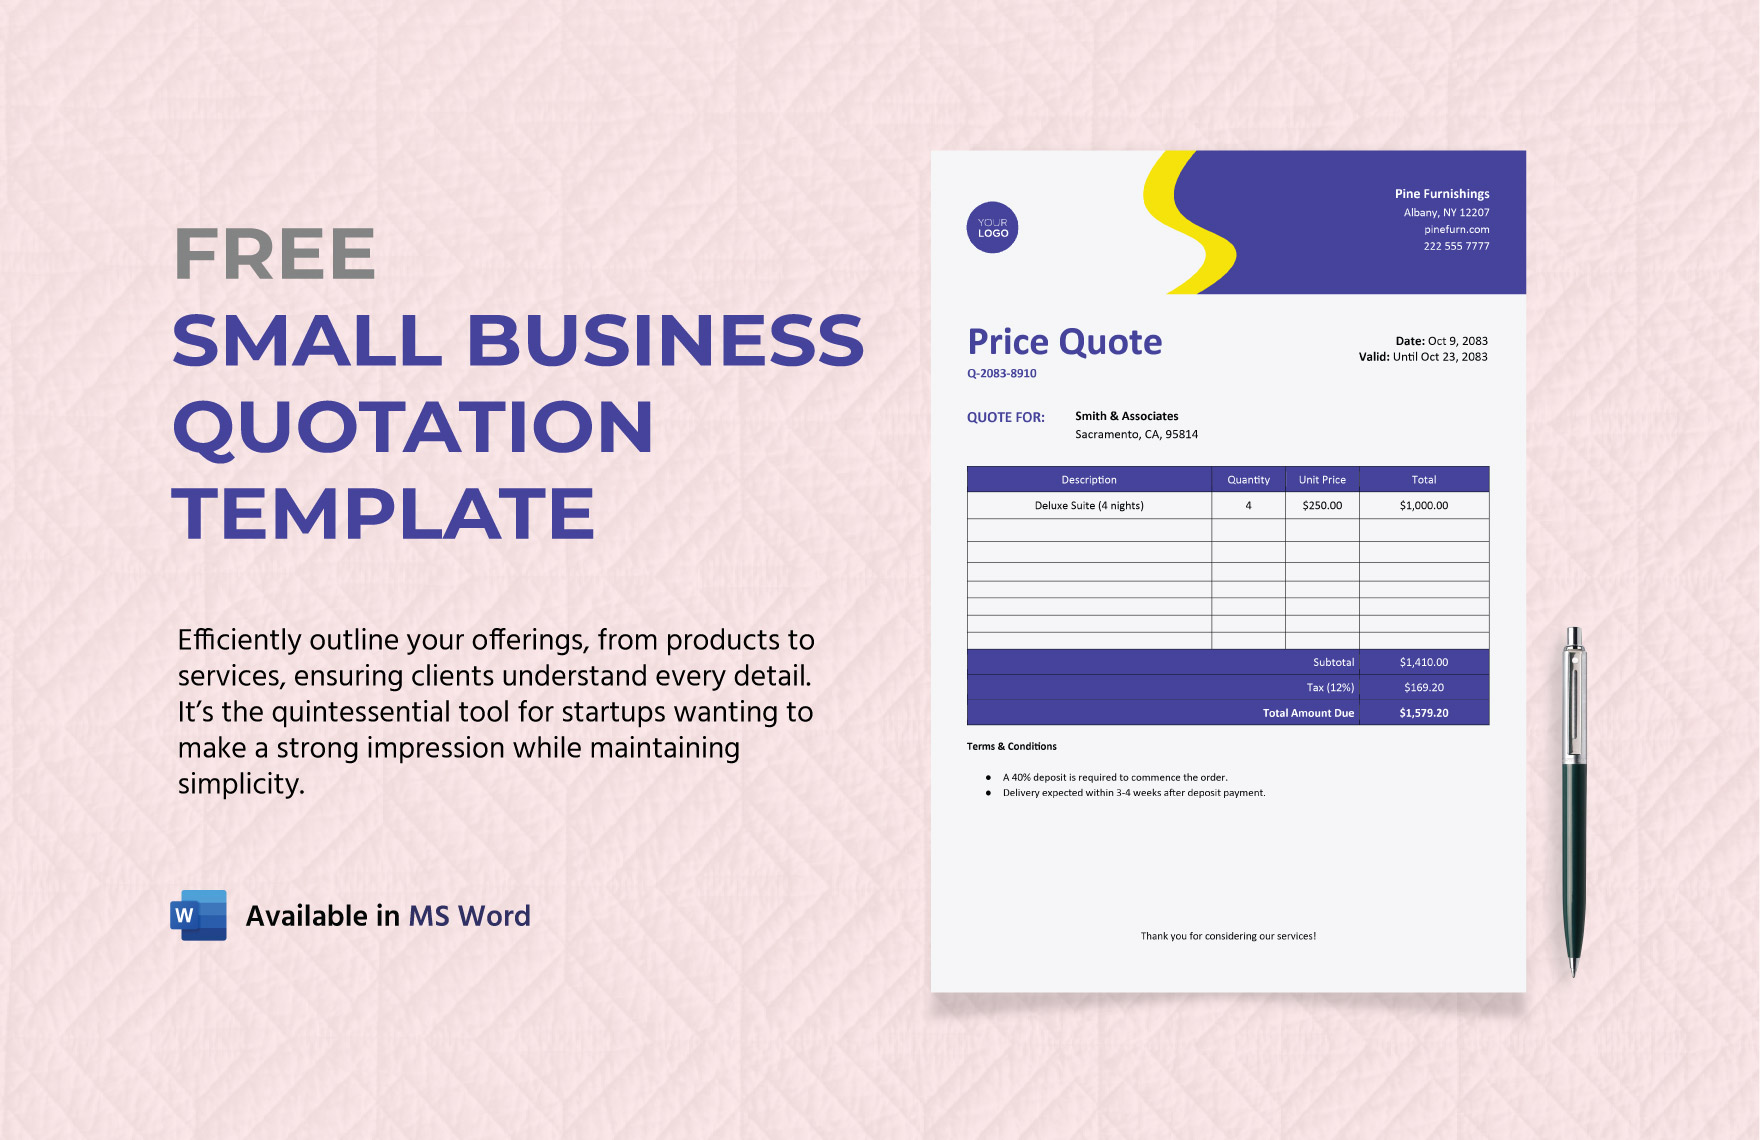 Free Small Business Quotation Template